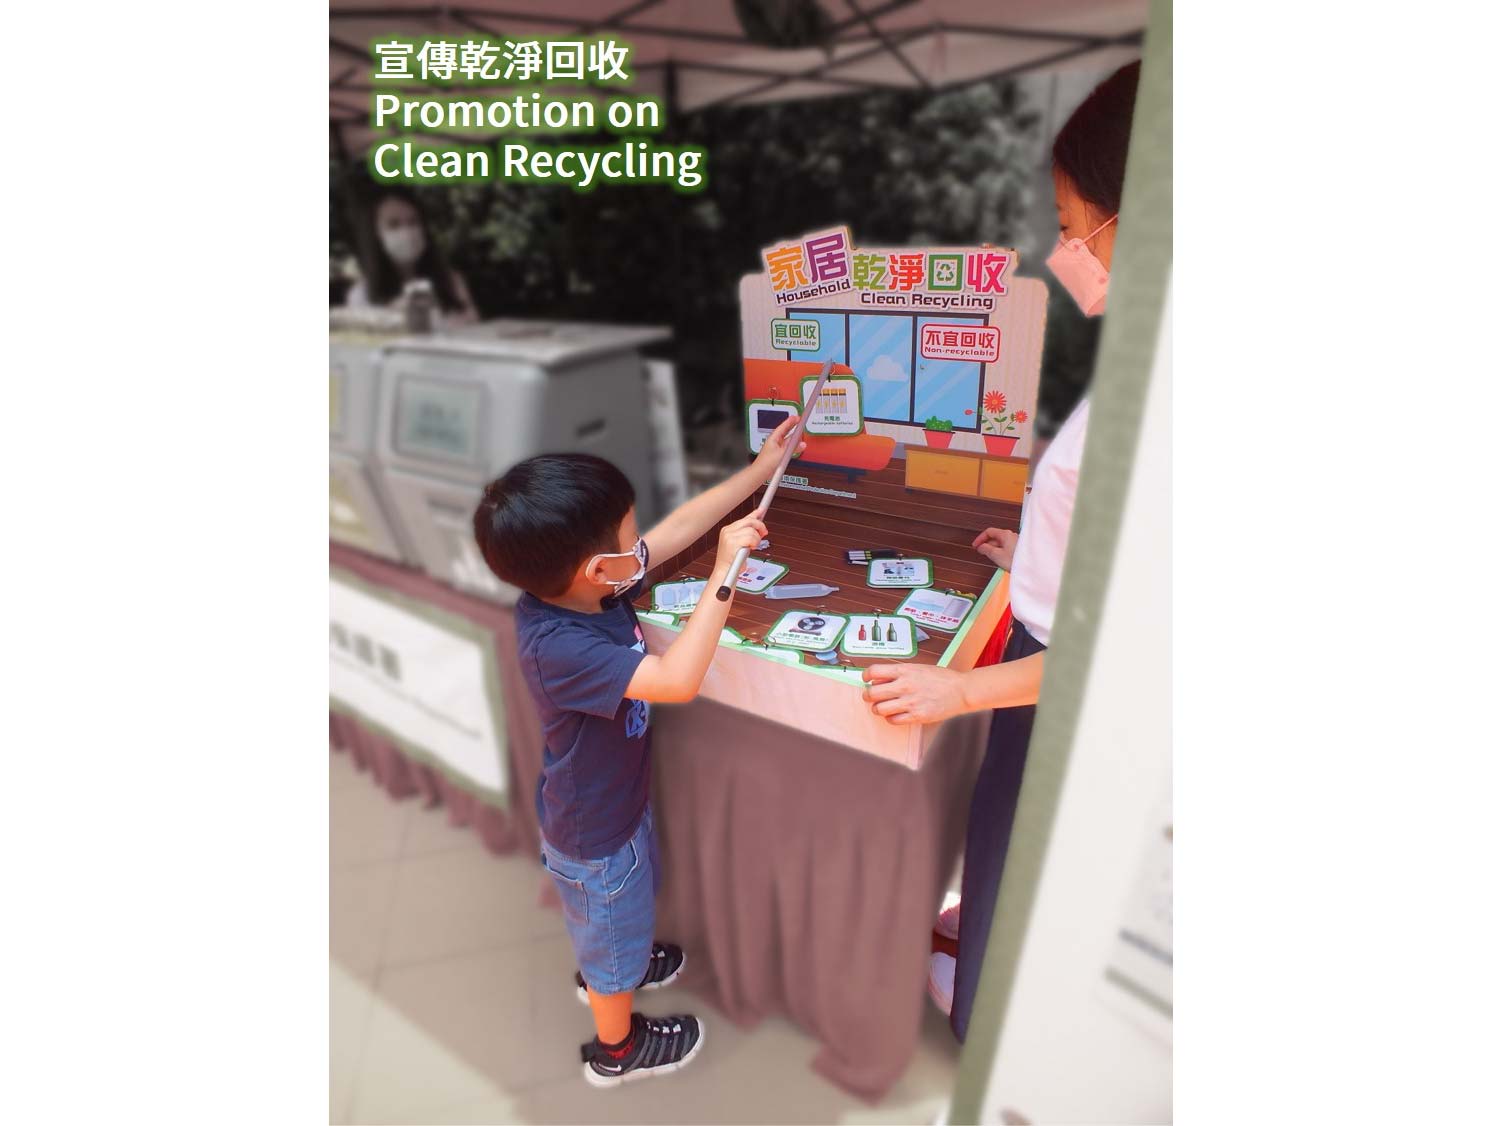 Promotion on Clean Recycling - Child playing at a game booth, distinguishing 'recyclable' items from 'non-recyclable' ones